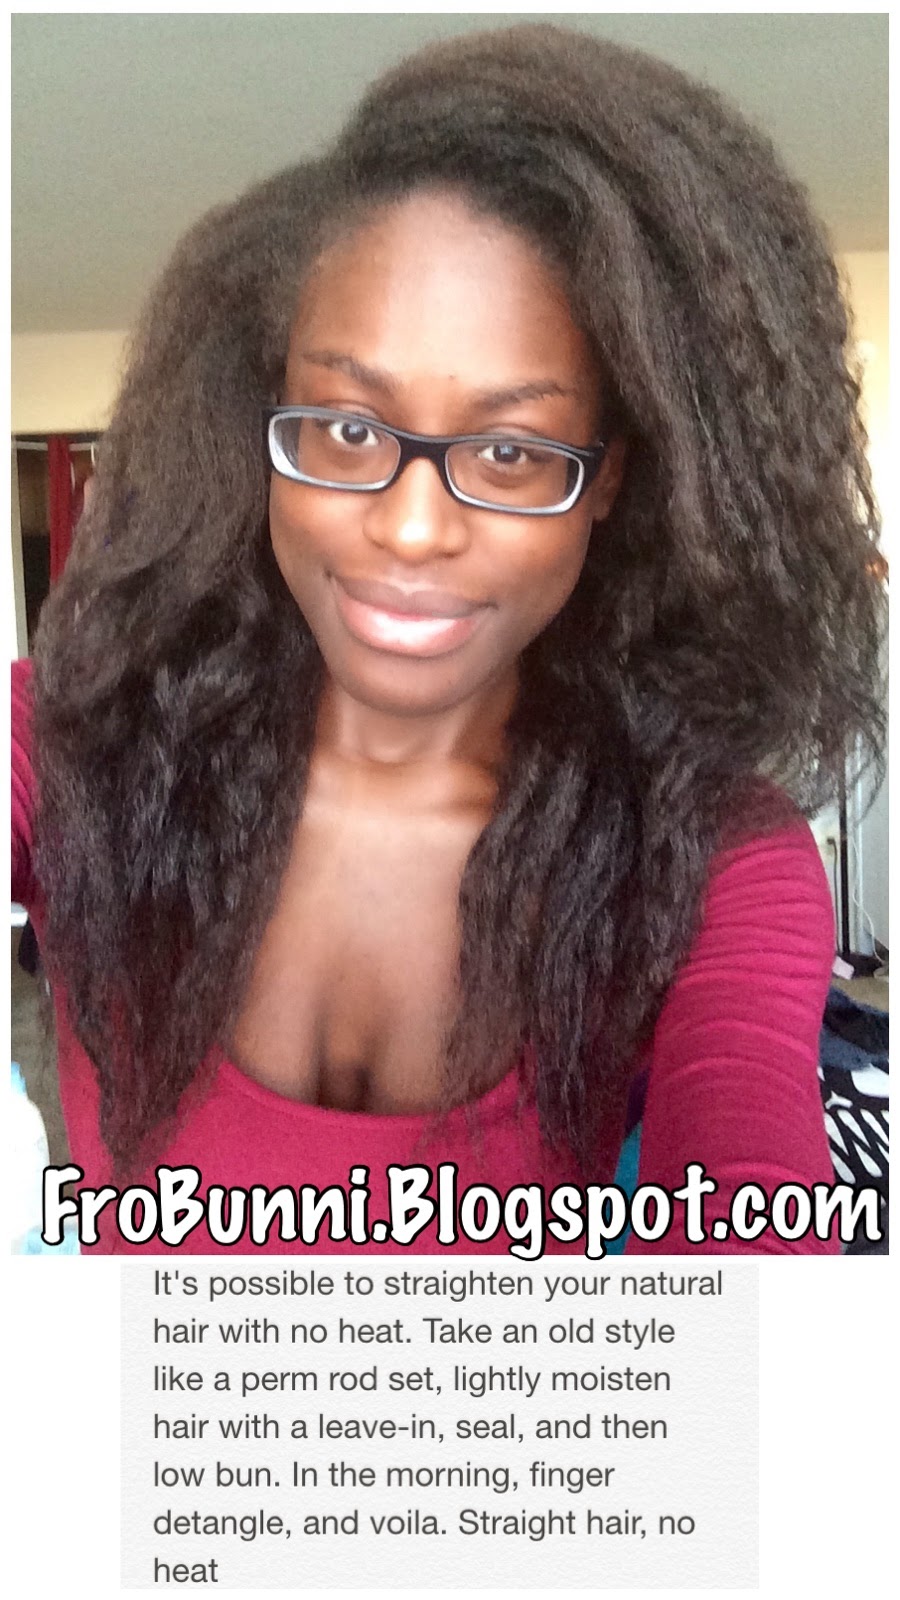 Frobunni Why I Don T Flat Iron My Hair And How To Straighten